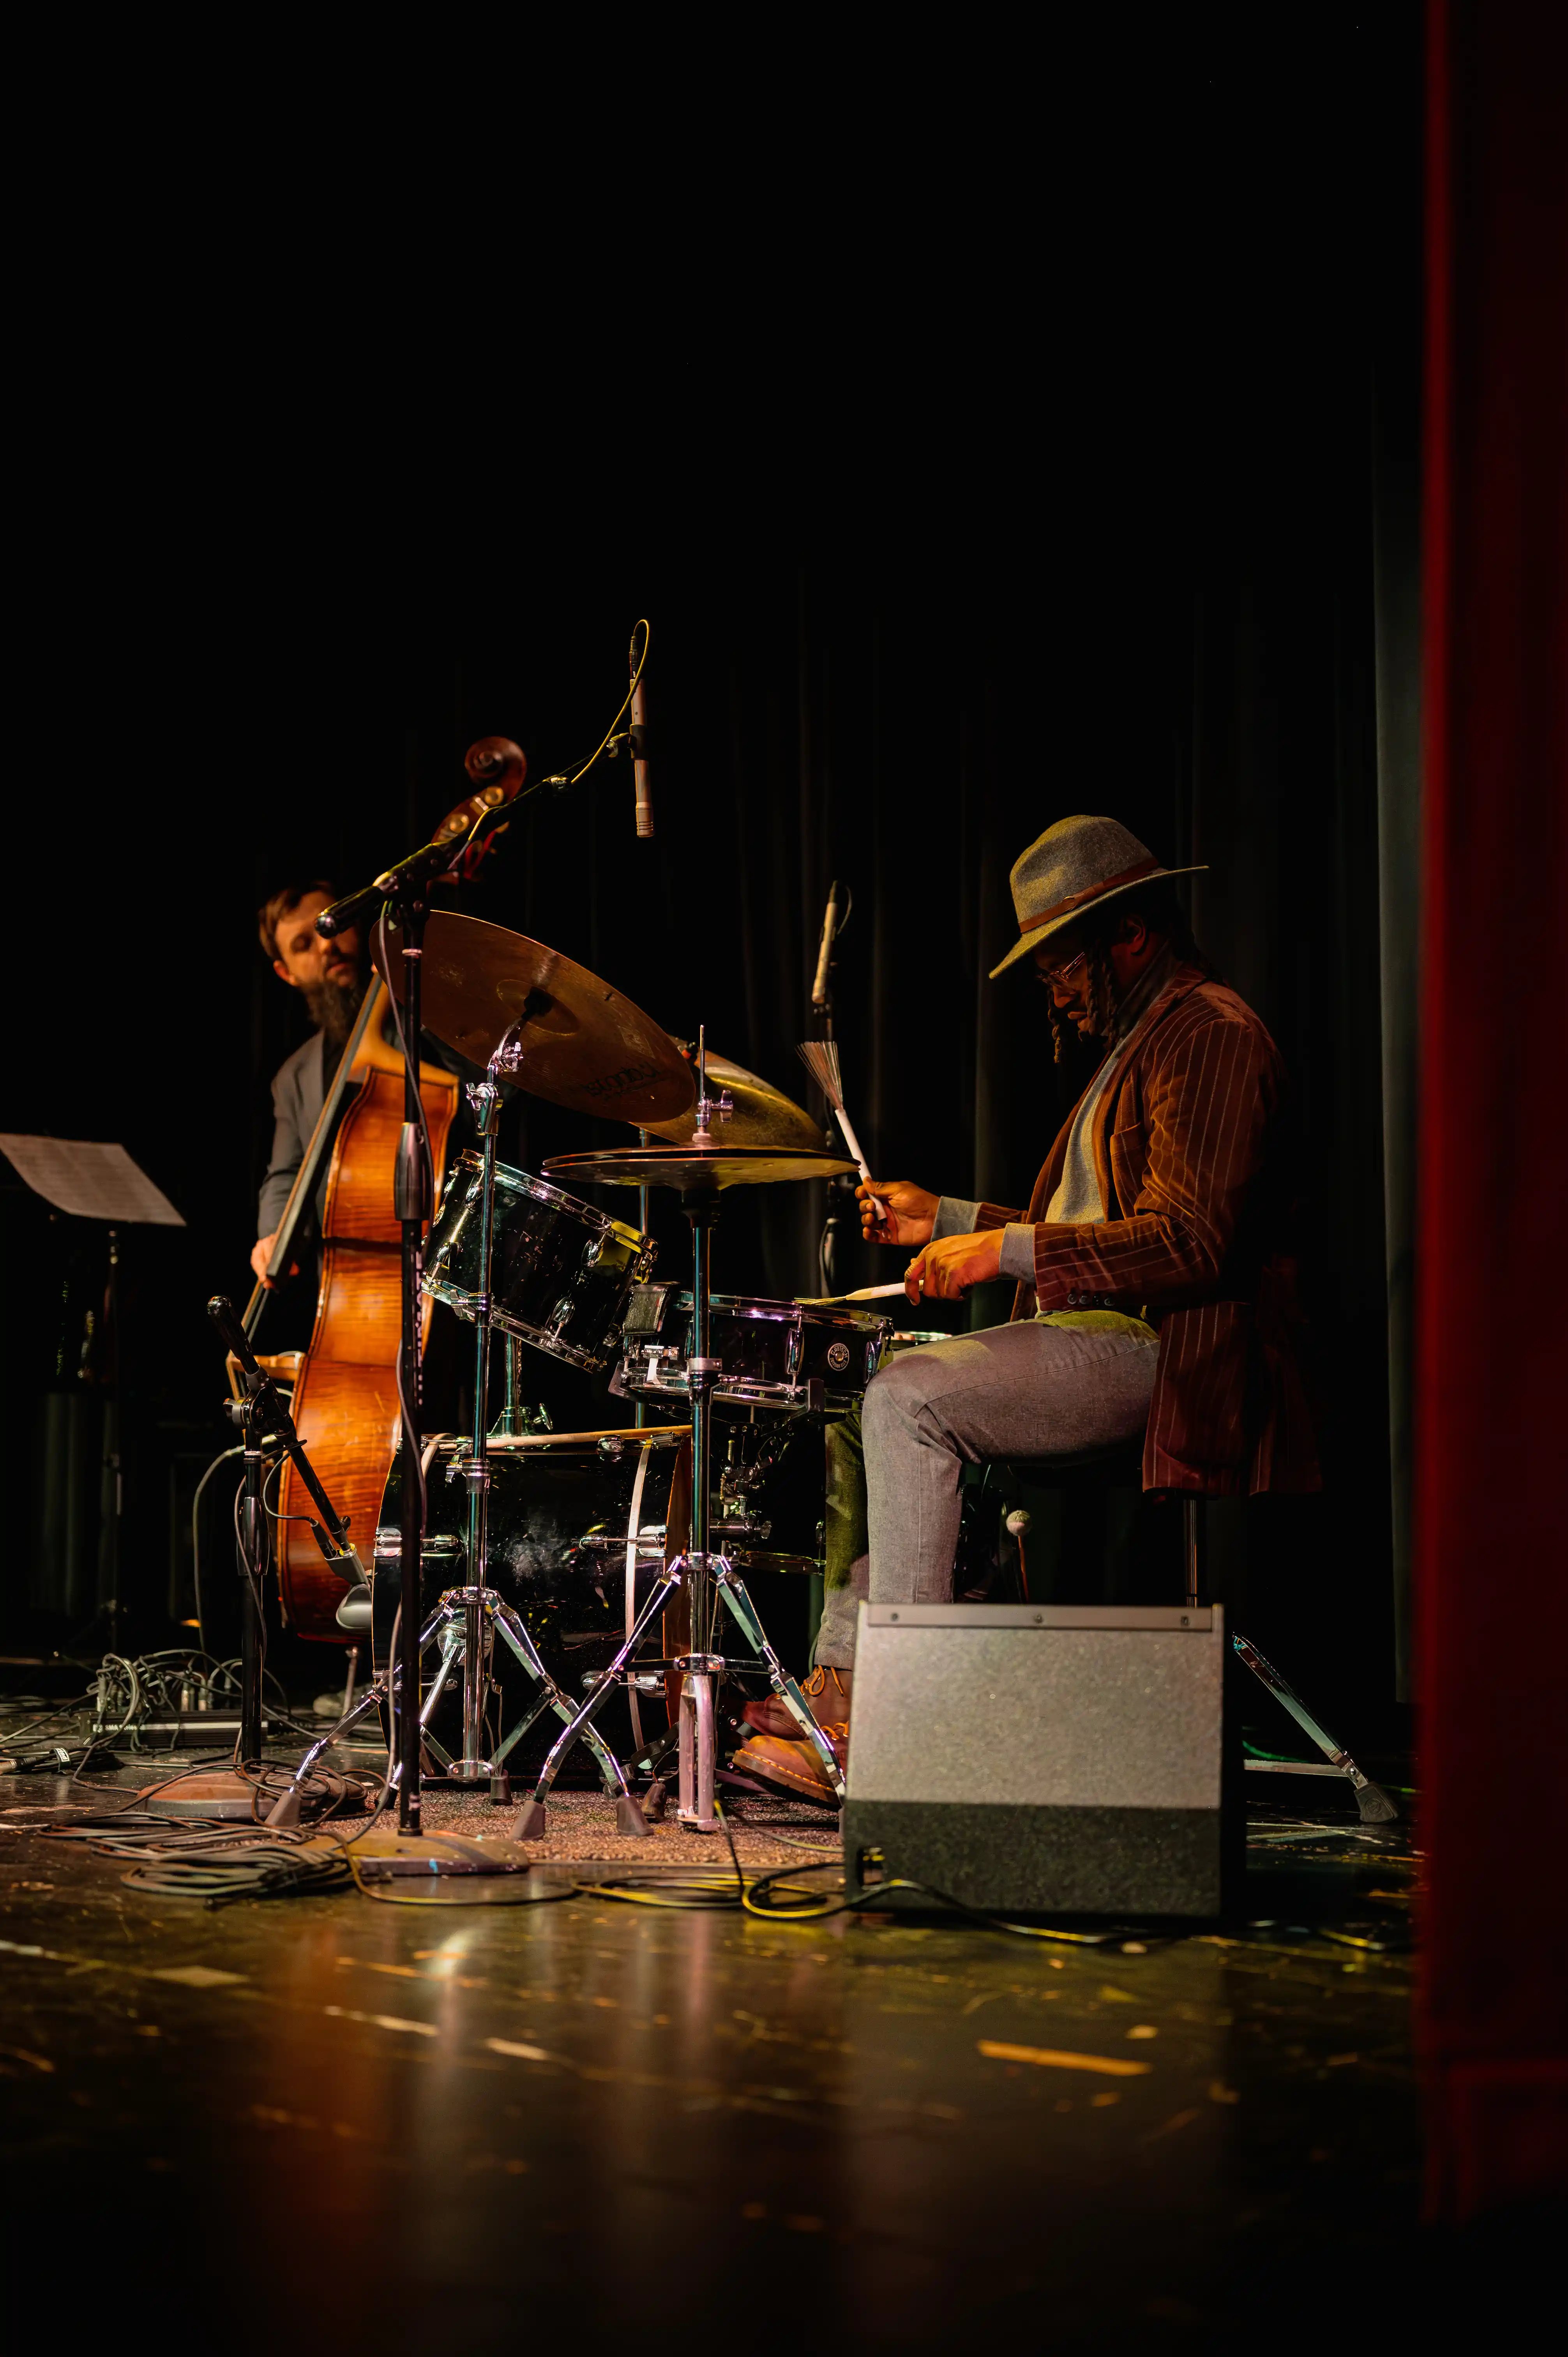 Musicians on stage with a drummer in the foreground and a double bass player in the background, performing under a spotlight.